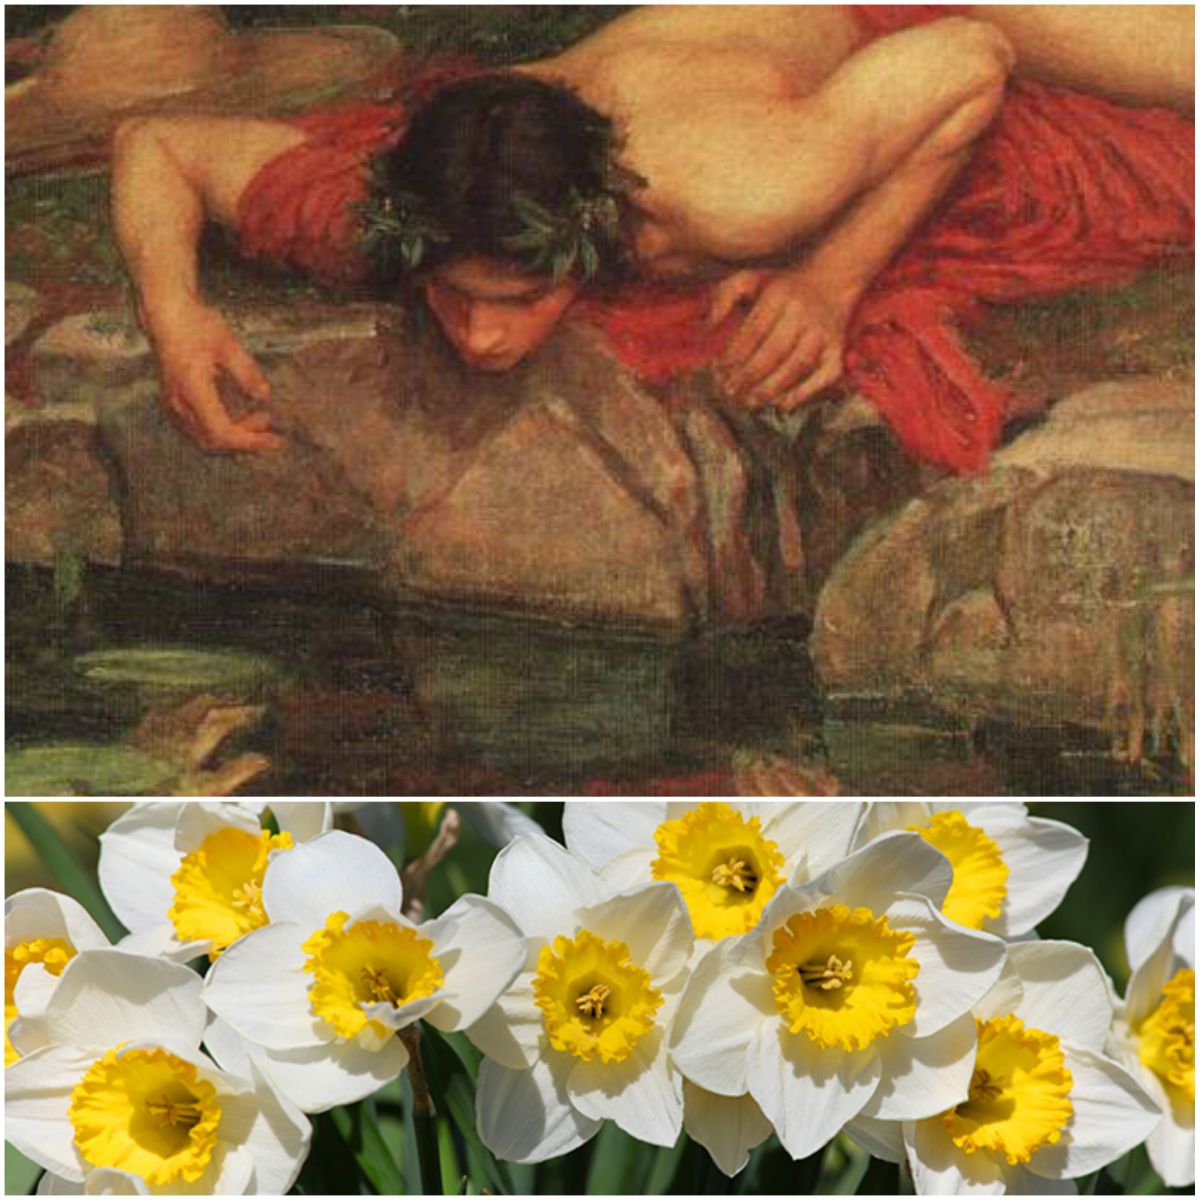 Nacissus and Narcissus flower